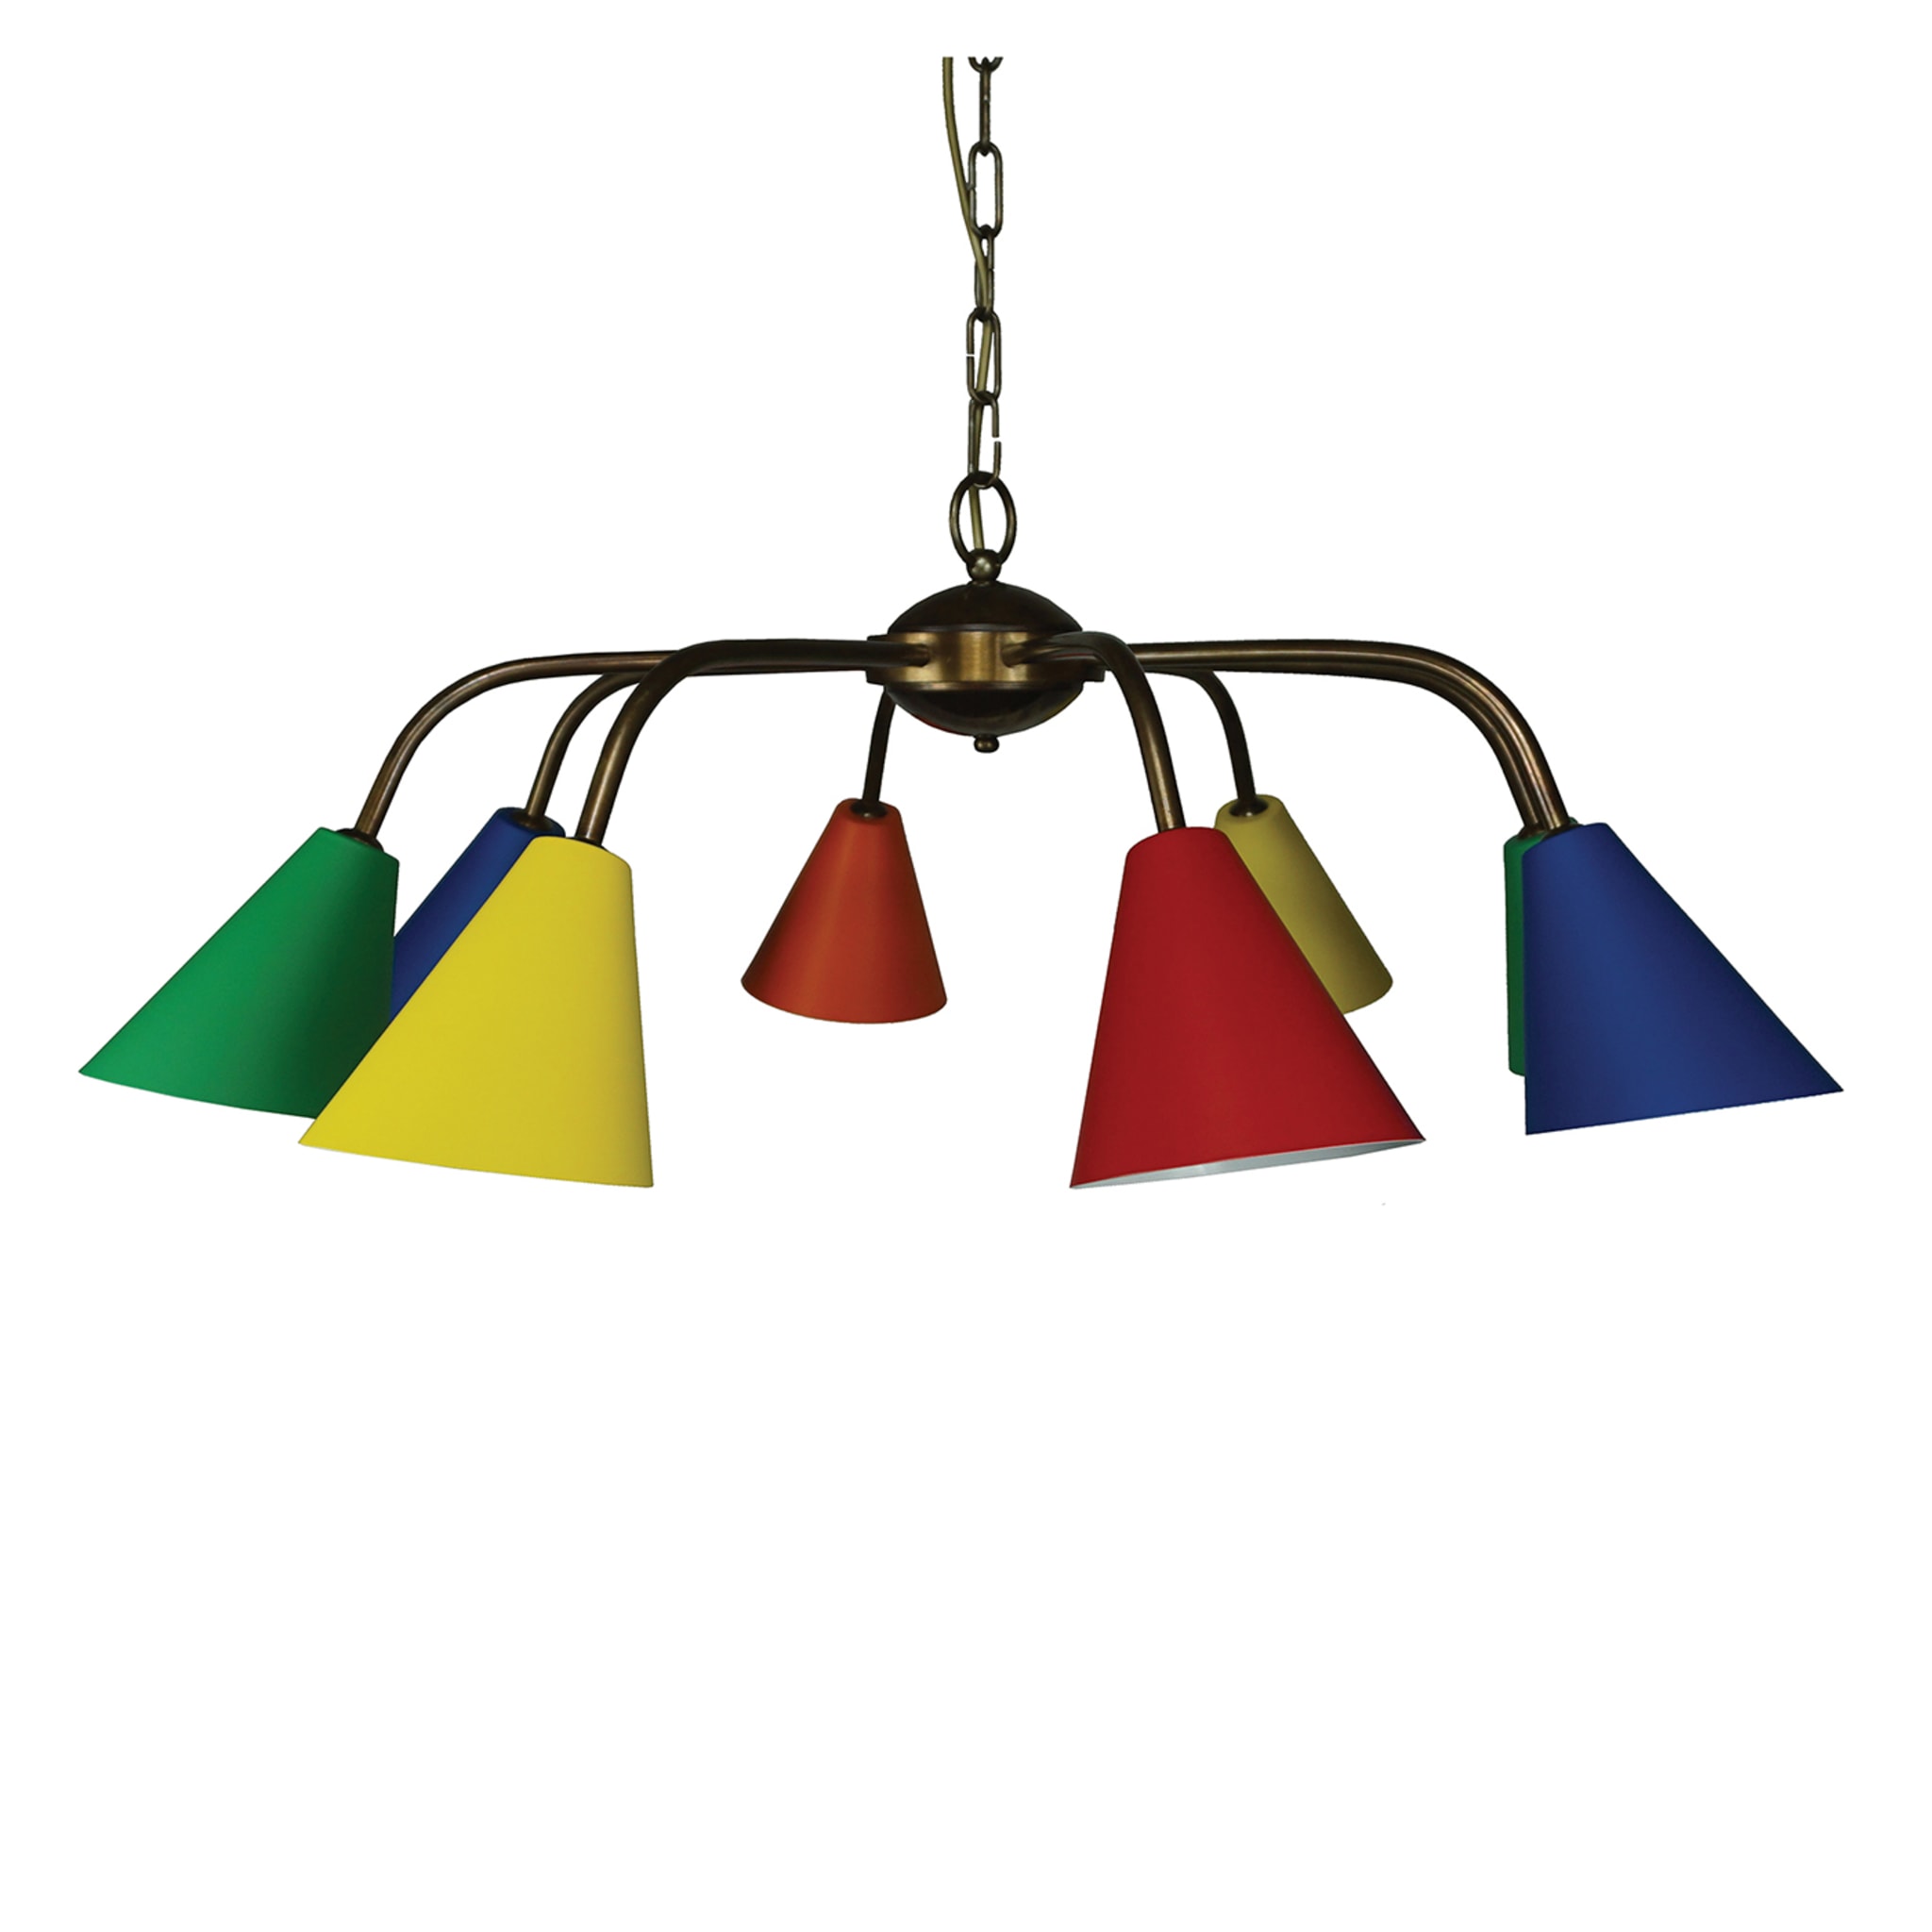 Petra M284 Polychrome Chandelier by Stefano Tabarin - Main view